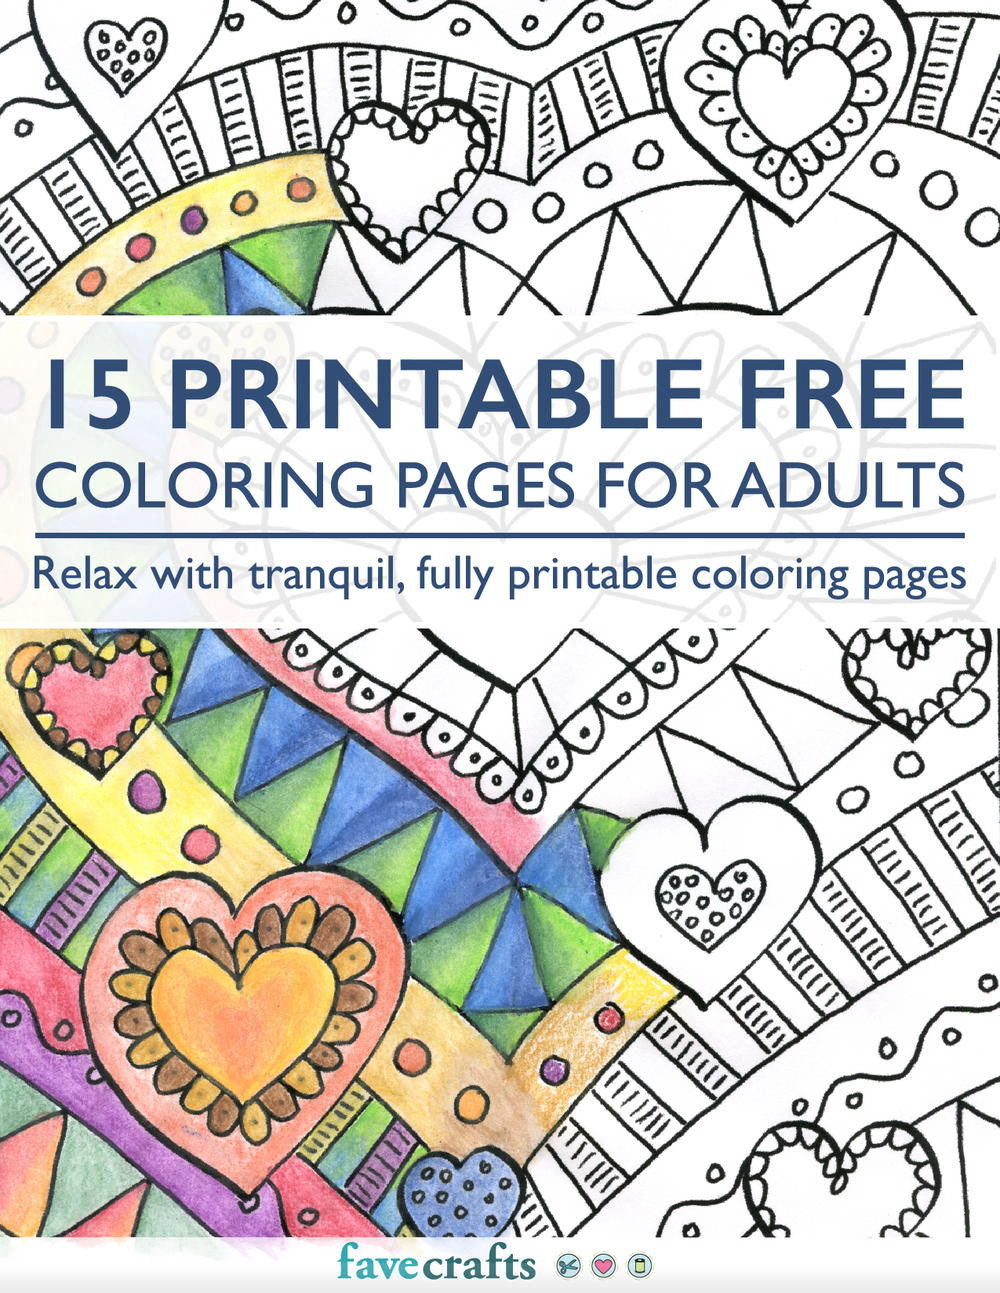 Coloring Pages For Adults Printable Free
 15 Printable Free Coloring Pages for Adults [PDF